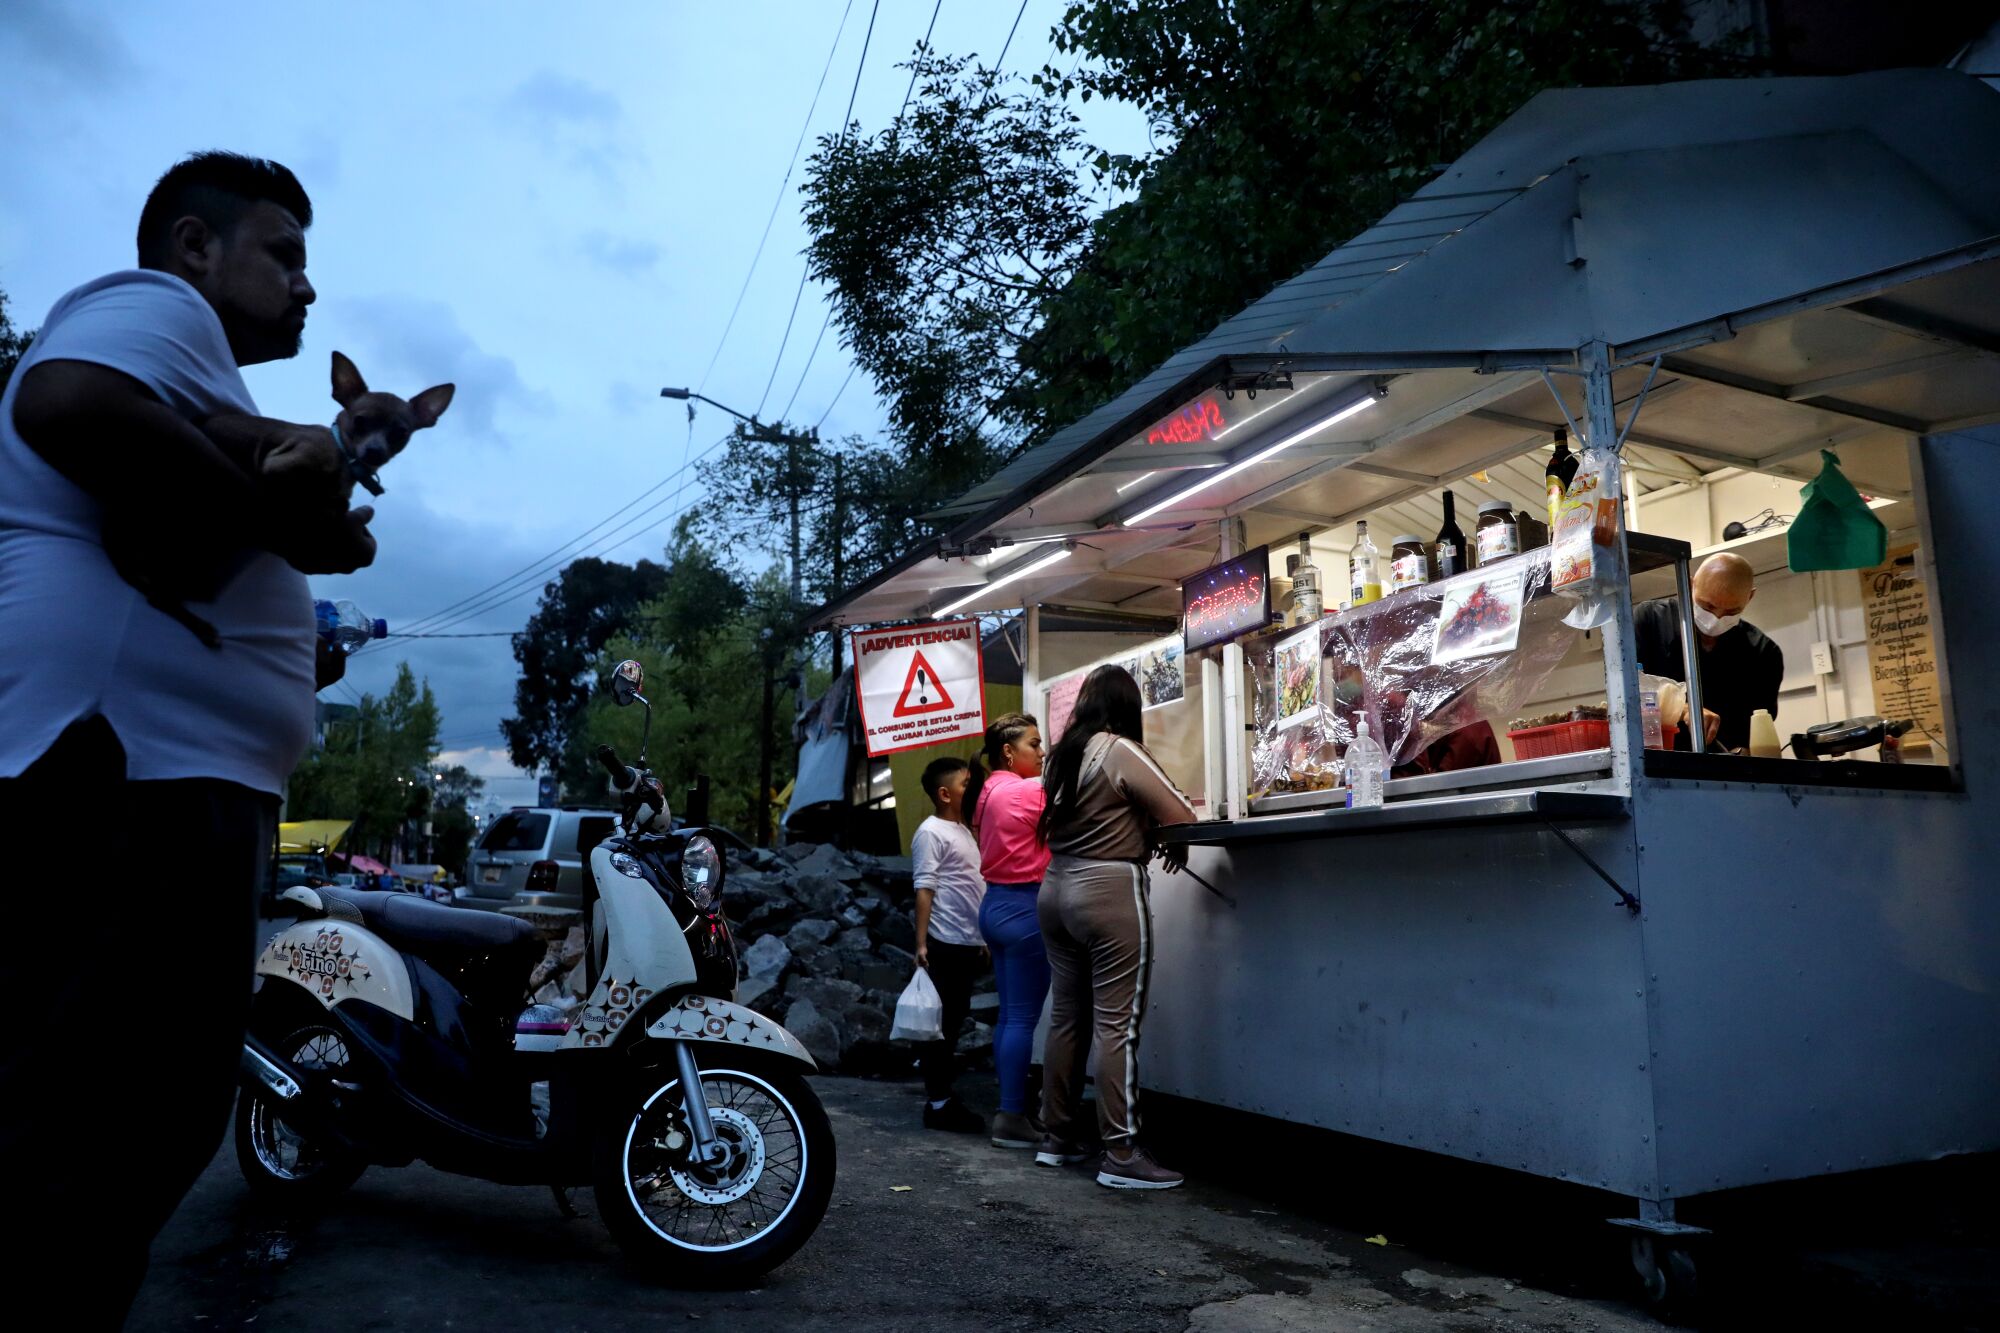 Customers wait for their order at Mexico City's Crepas El Mana, where wrestler Joel Bernal Galicia works with his wife.